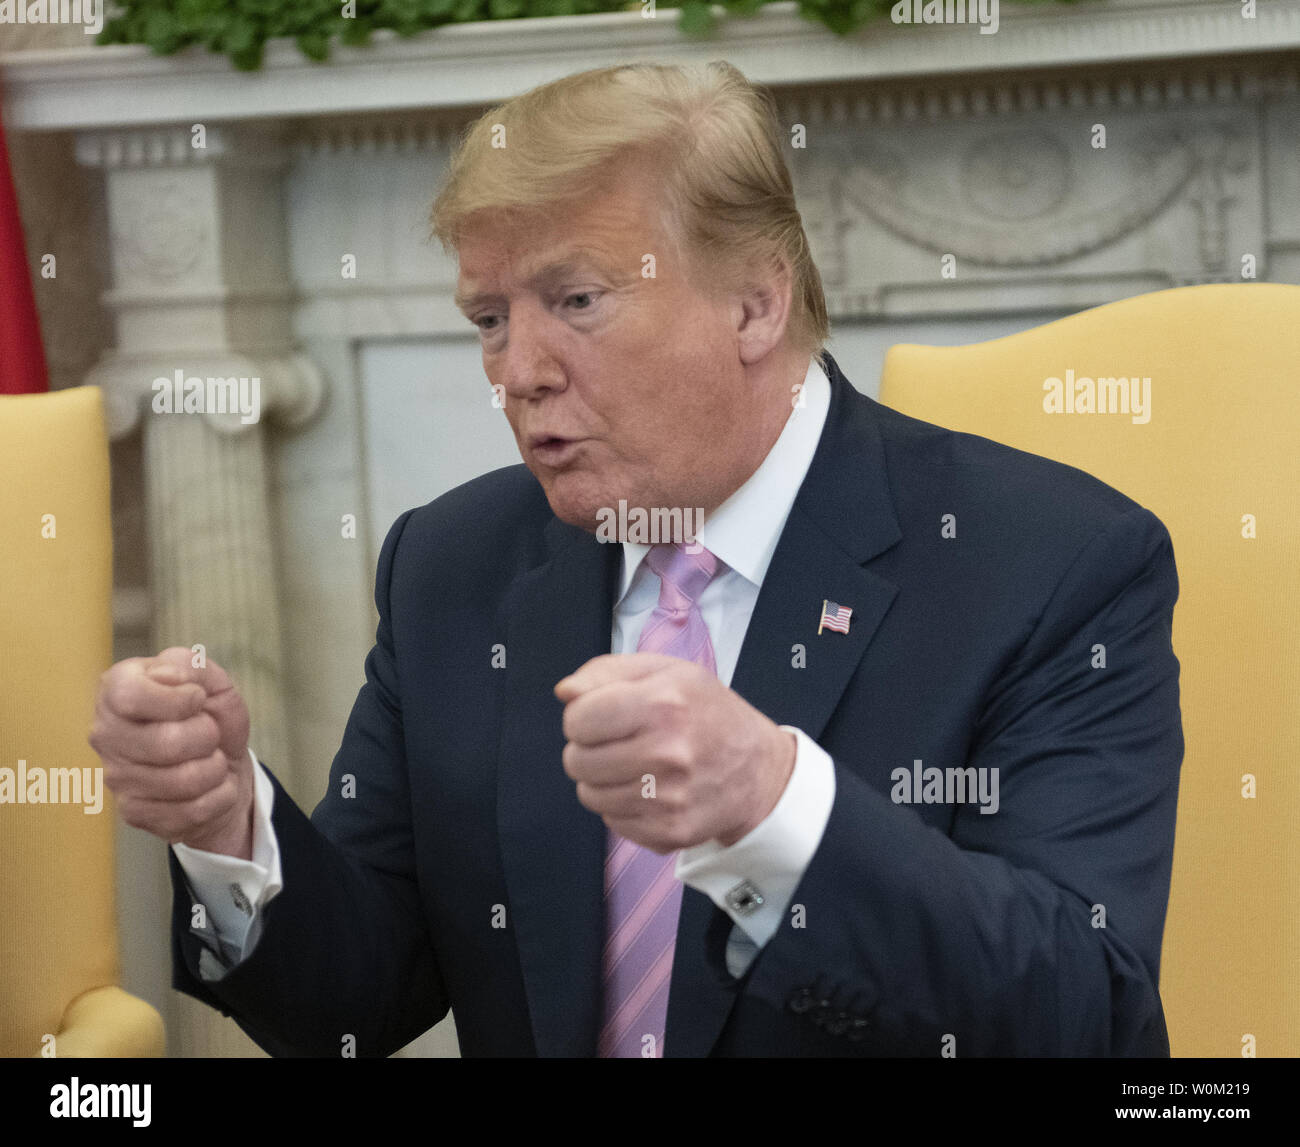 President Donald Trump (L) meets with Egyptian President Abdel Fattah el-Sisi (not shown) in the Oval Office of the White House in Washington, DC on April 9, 2019.  El-Sisi is visiting the White House for talks.     Photo by Ron Sachs/UPI Stock Photo